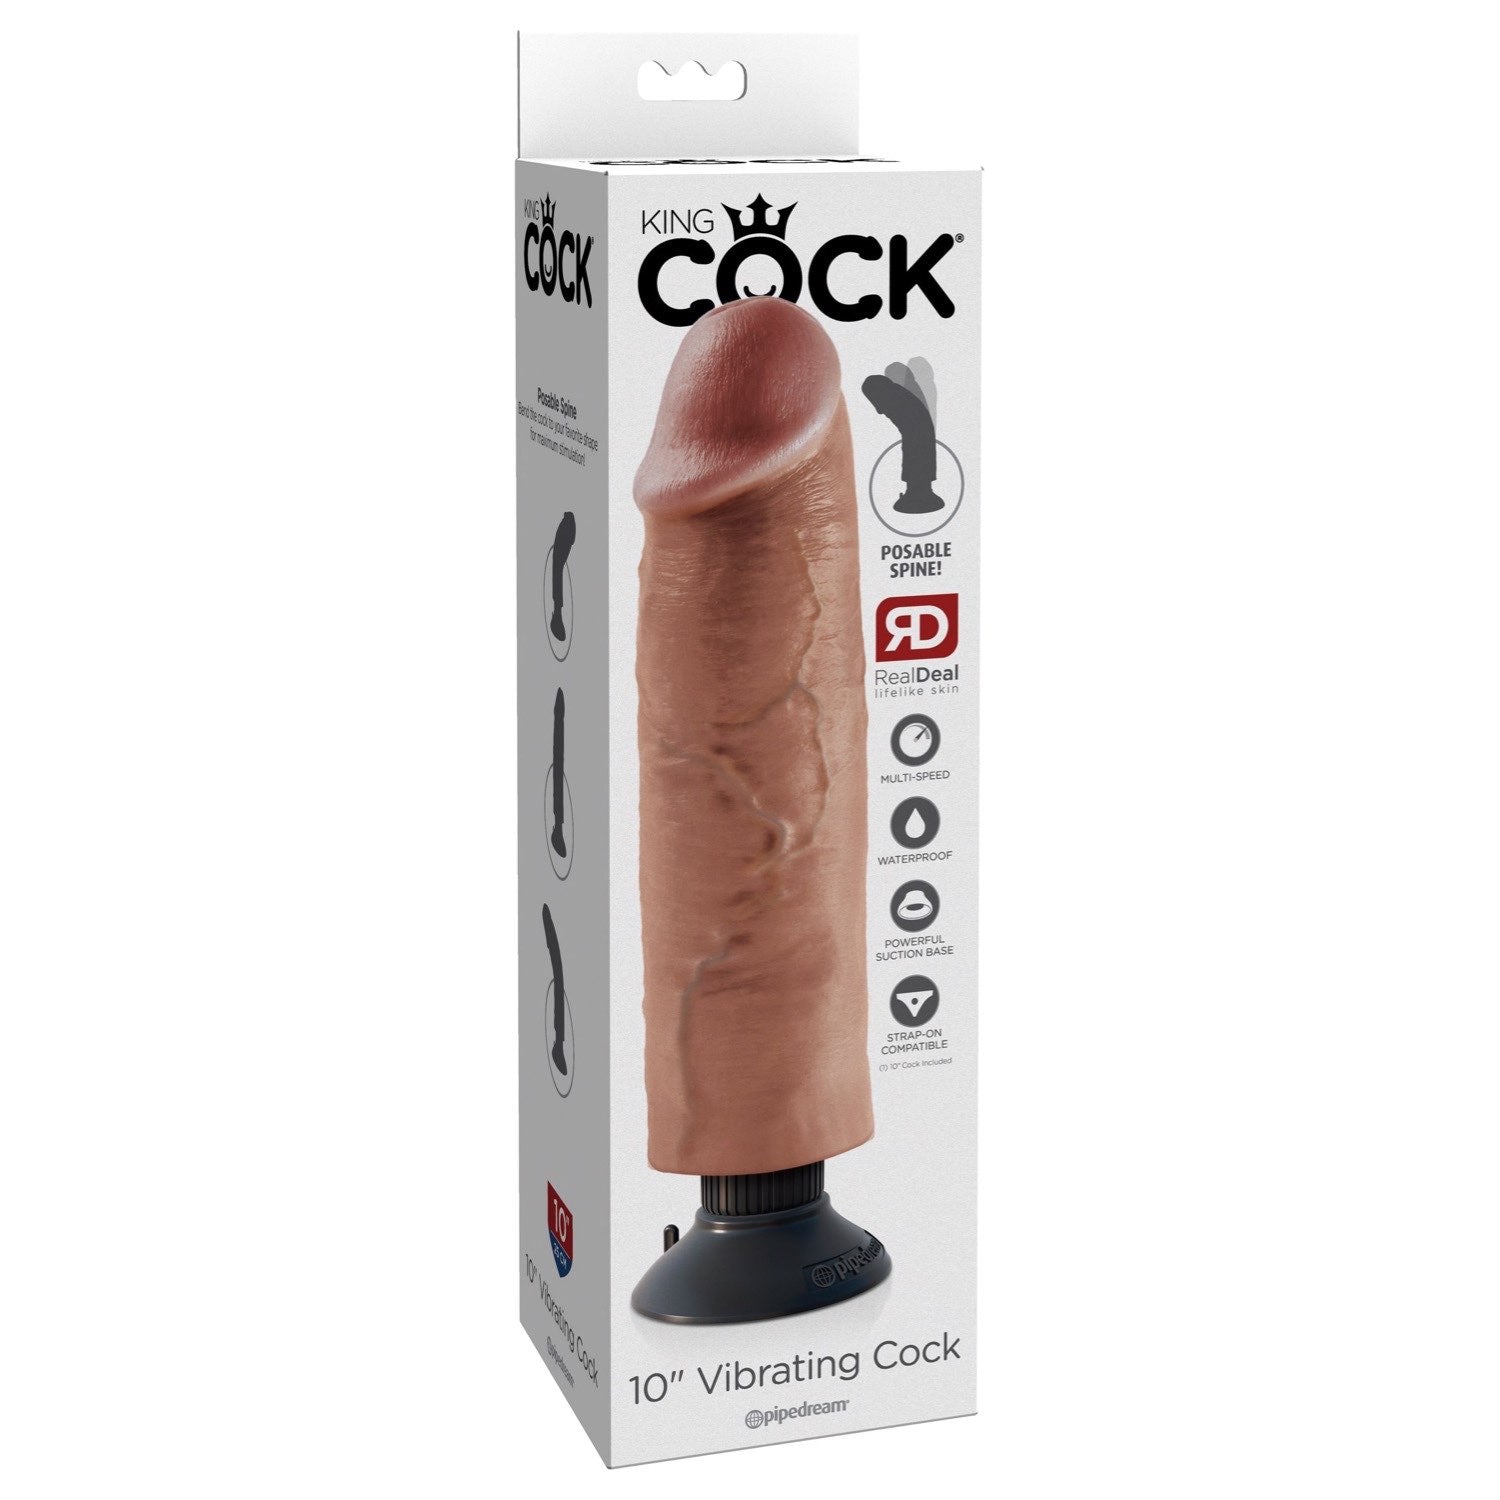 King Cock 10IN Vibrating Cock - Tan by Pipedream